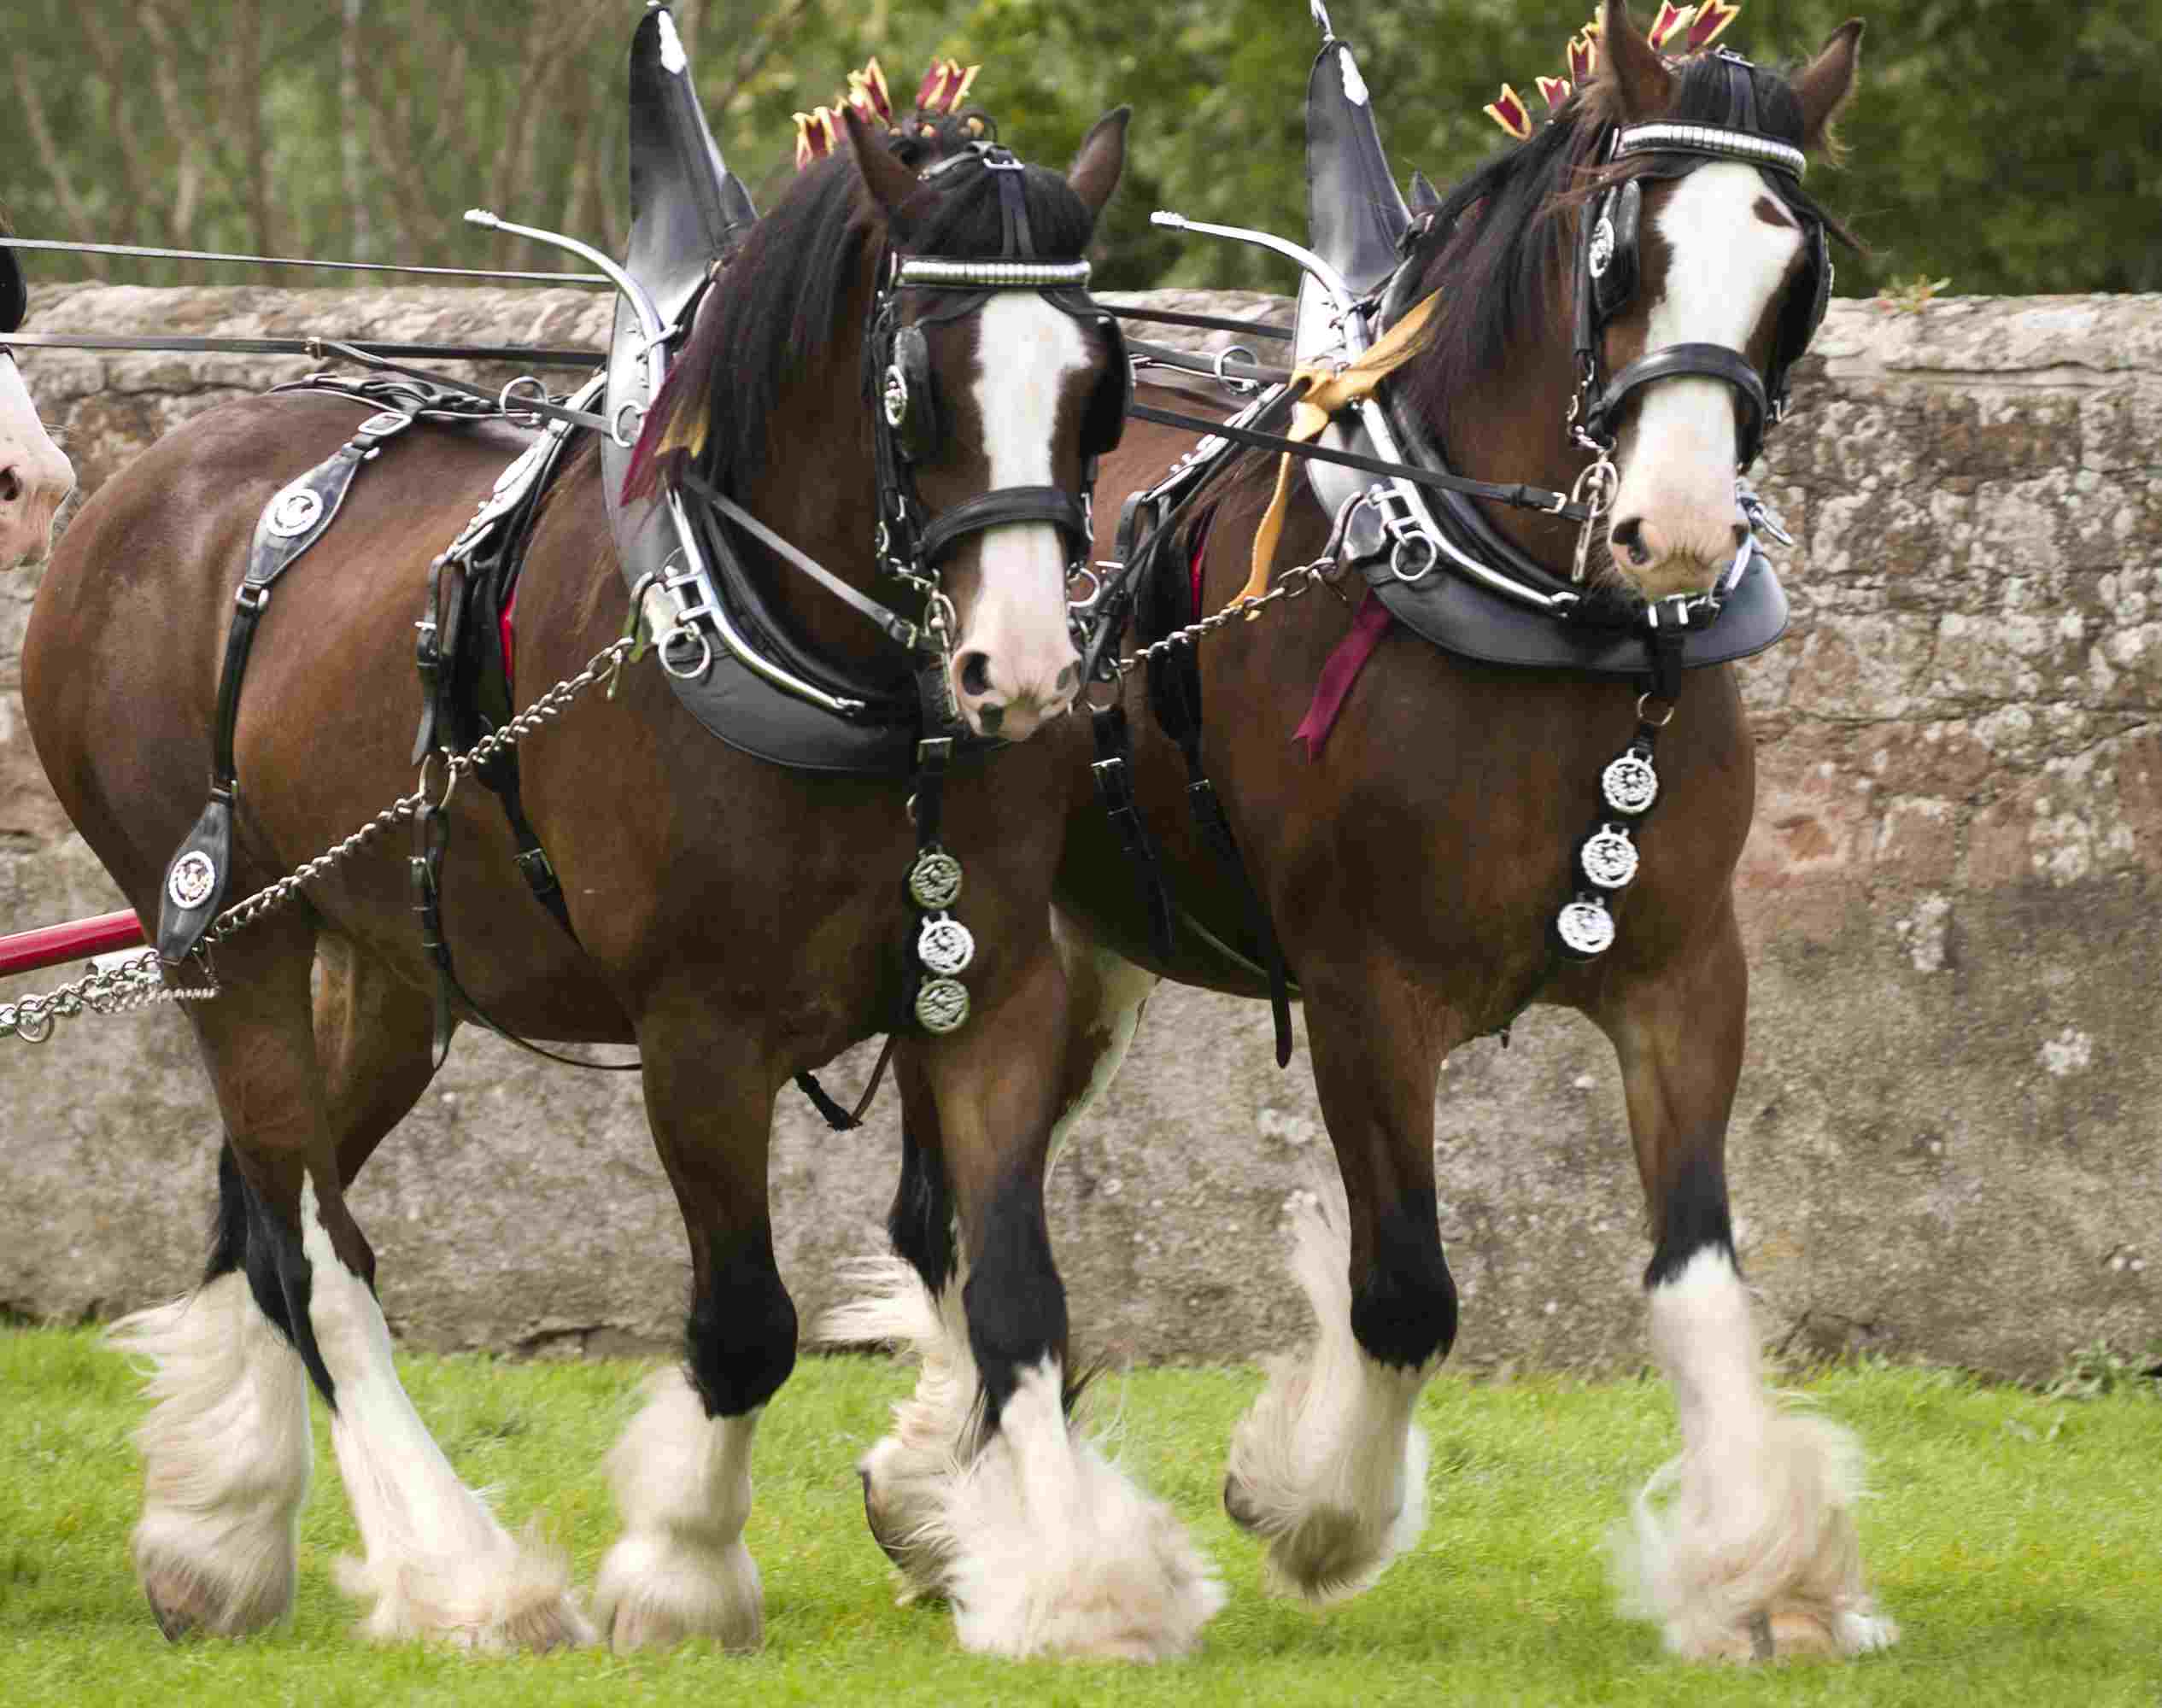 Clydesdale horses in full tack